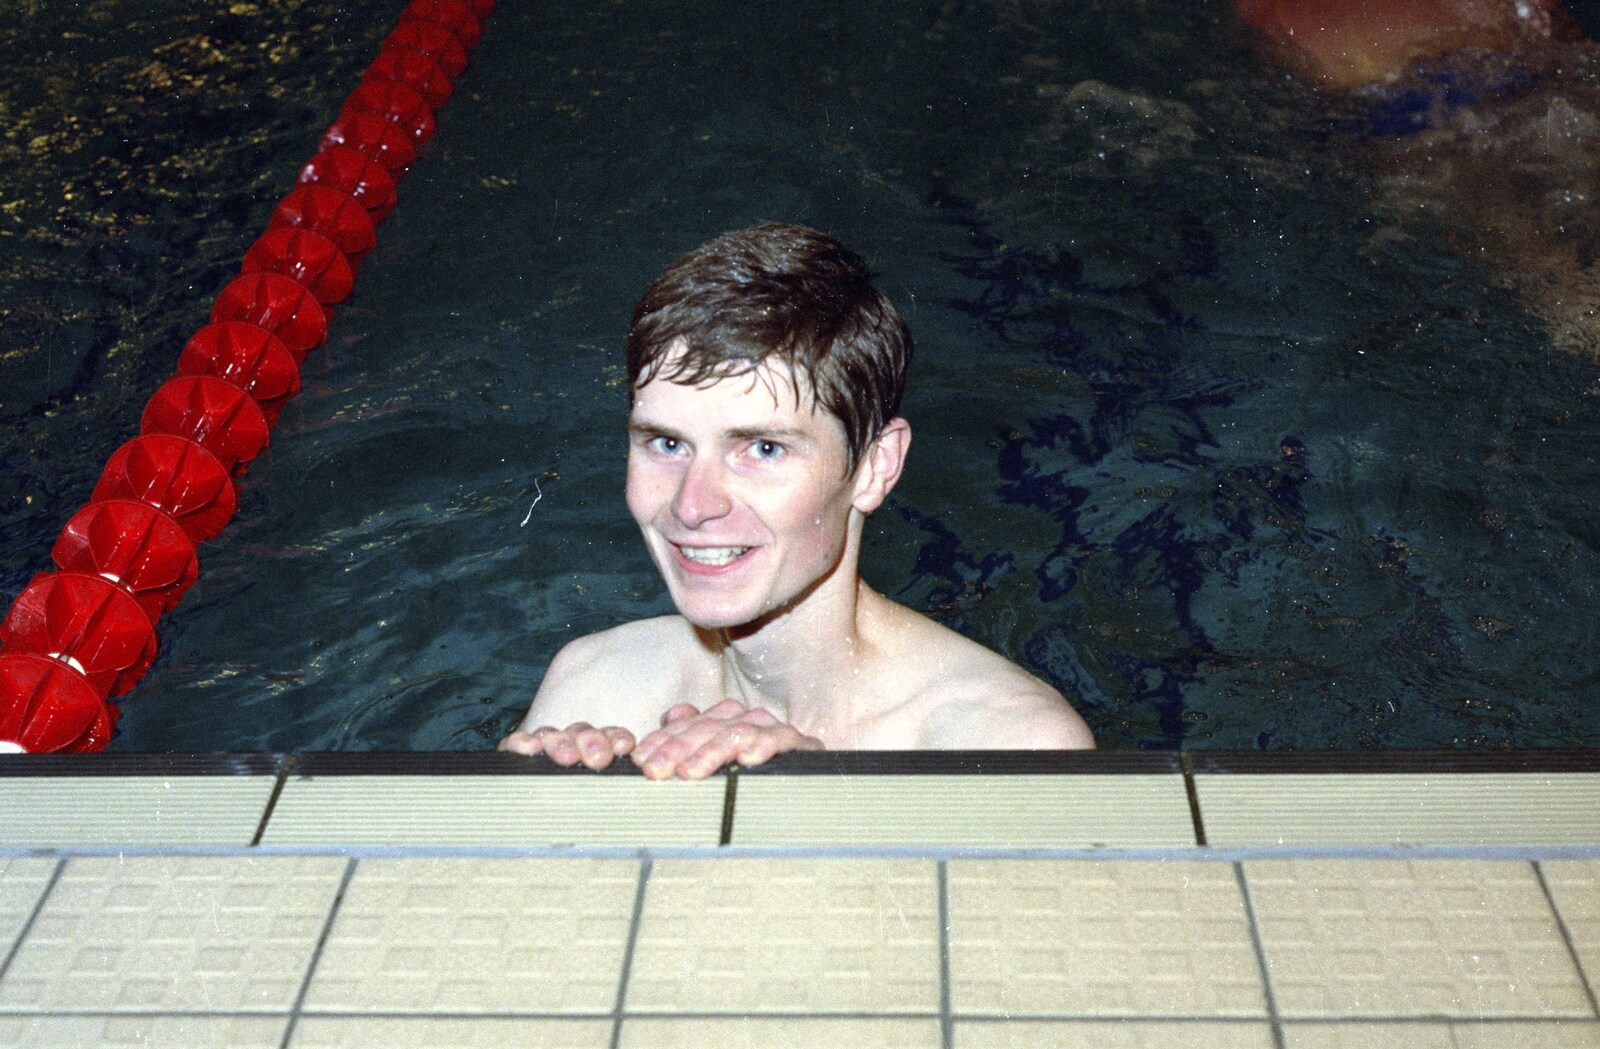 Ninja M stops for a photo from The Swan does the BHF Sponsored Swim, Diss Pool, Norfolk - 3rd October 1994